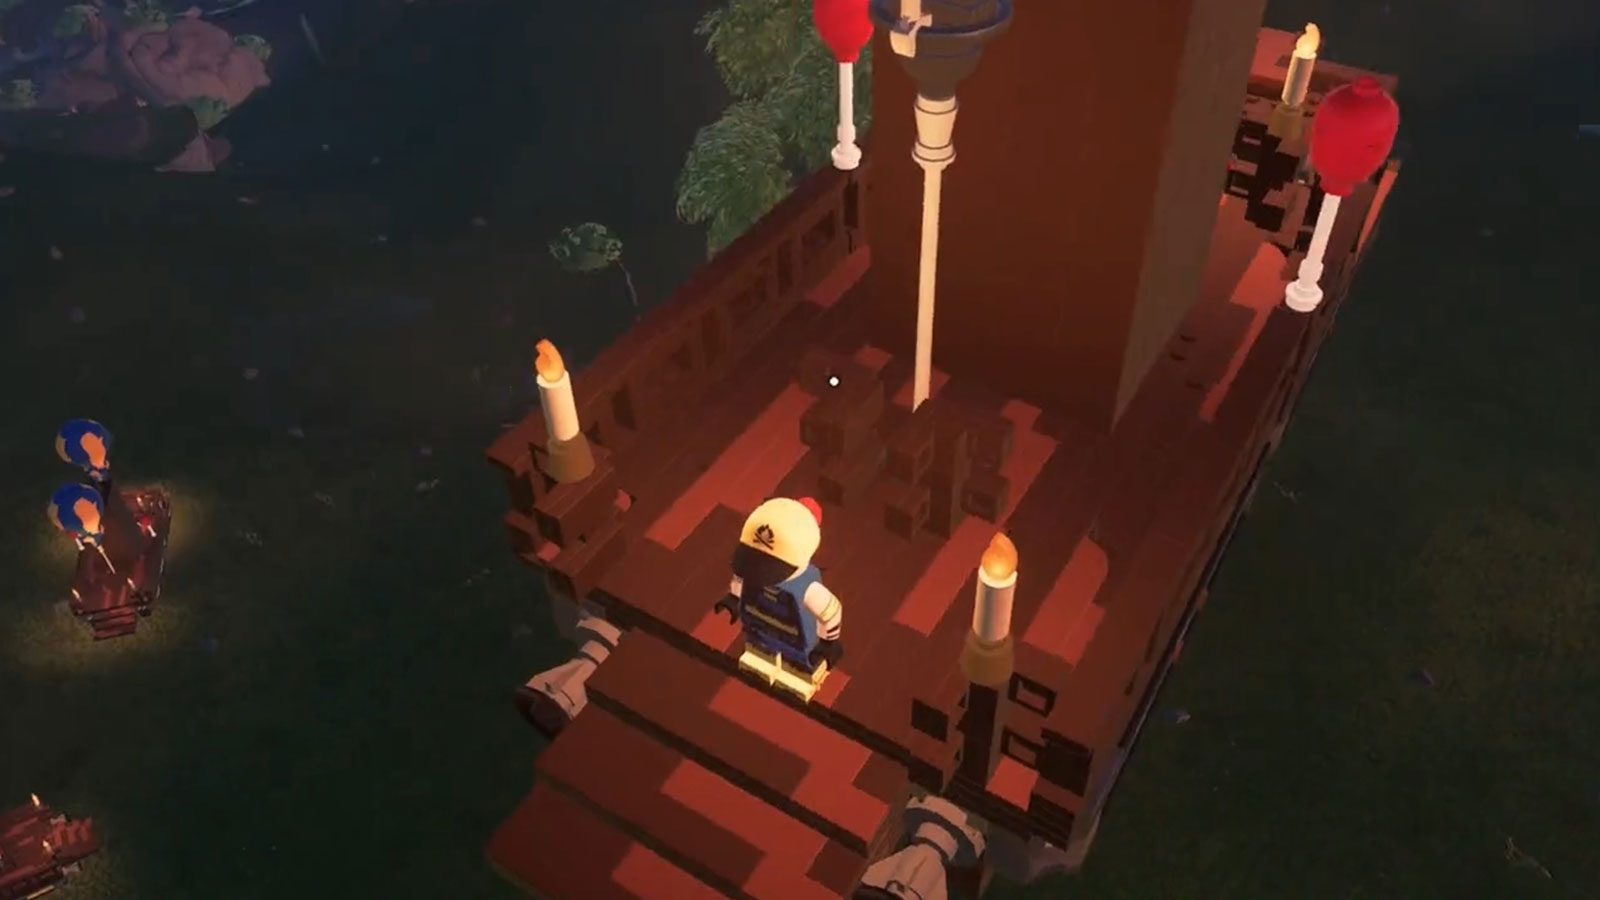 A LEGO Fortnite player demonstrates how to build the ultimate airship